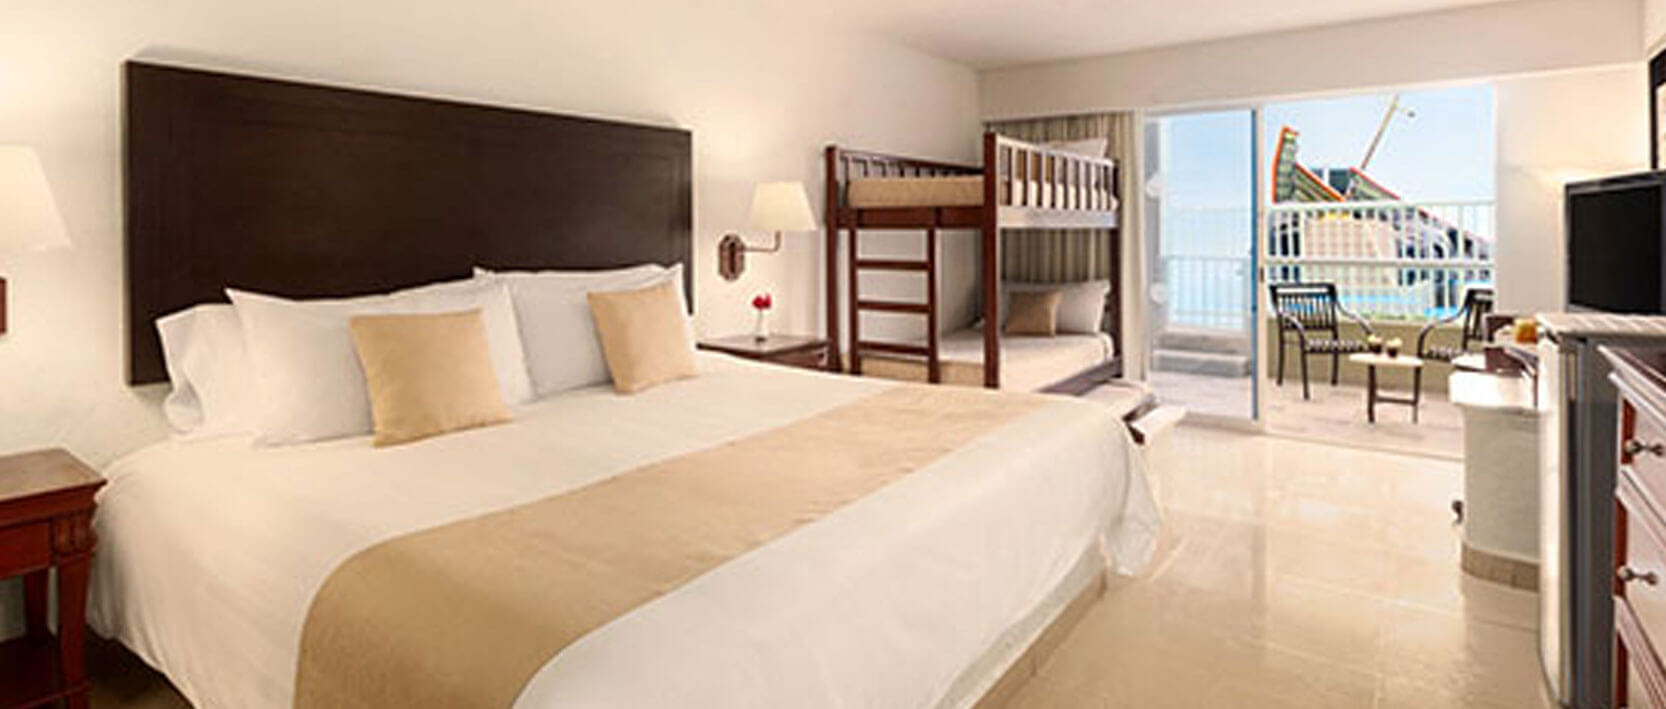 Gran Caribe Cancun Accommodations - Family Junior Suite